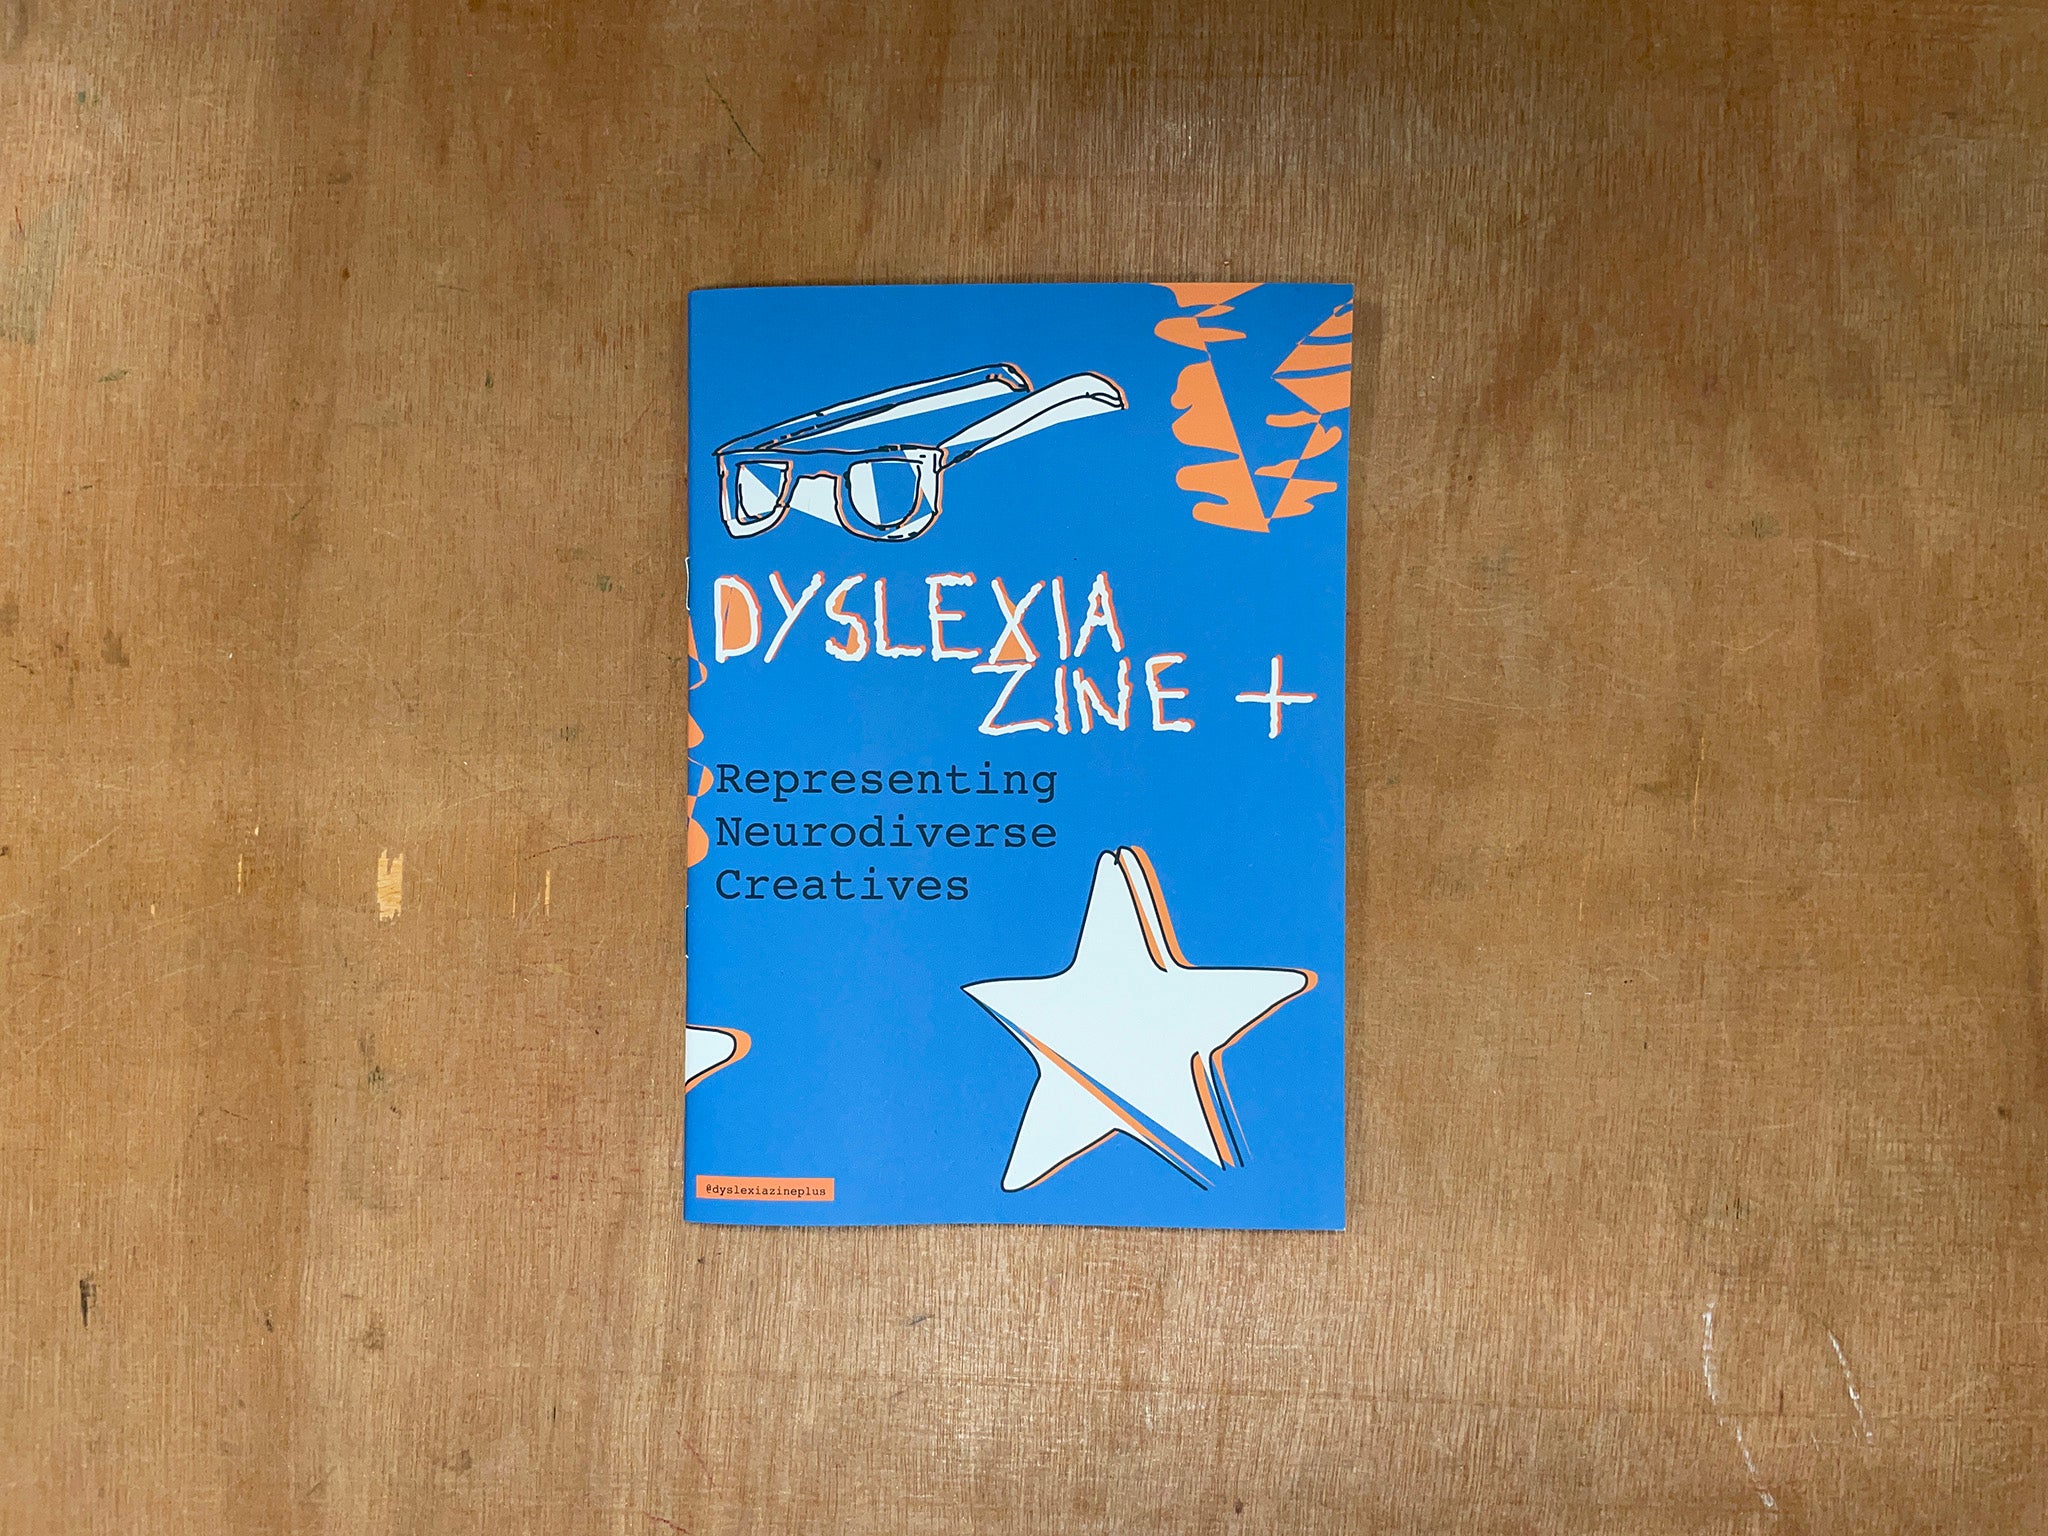 DYSLEXIA ZINE + by Various Artists